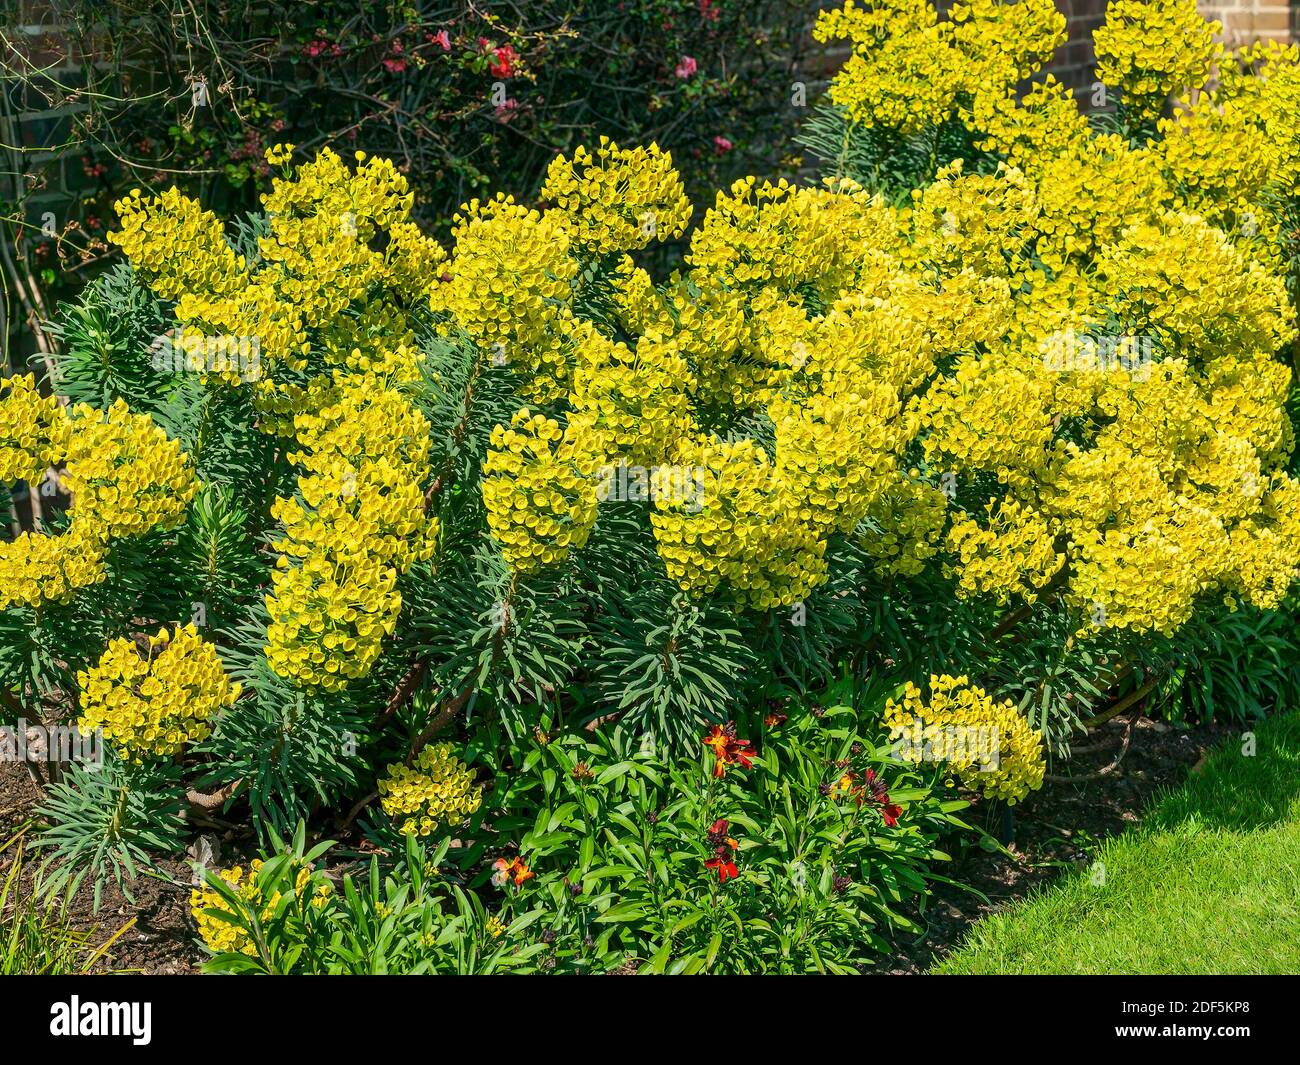 Euphorbia characias subs wulfenii a spring summer evergreen flowering shrub plant with a  springtime summer yellow flower, stock photo image Stock Photo